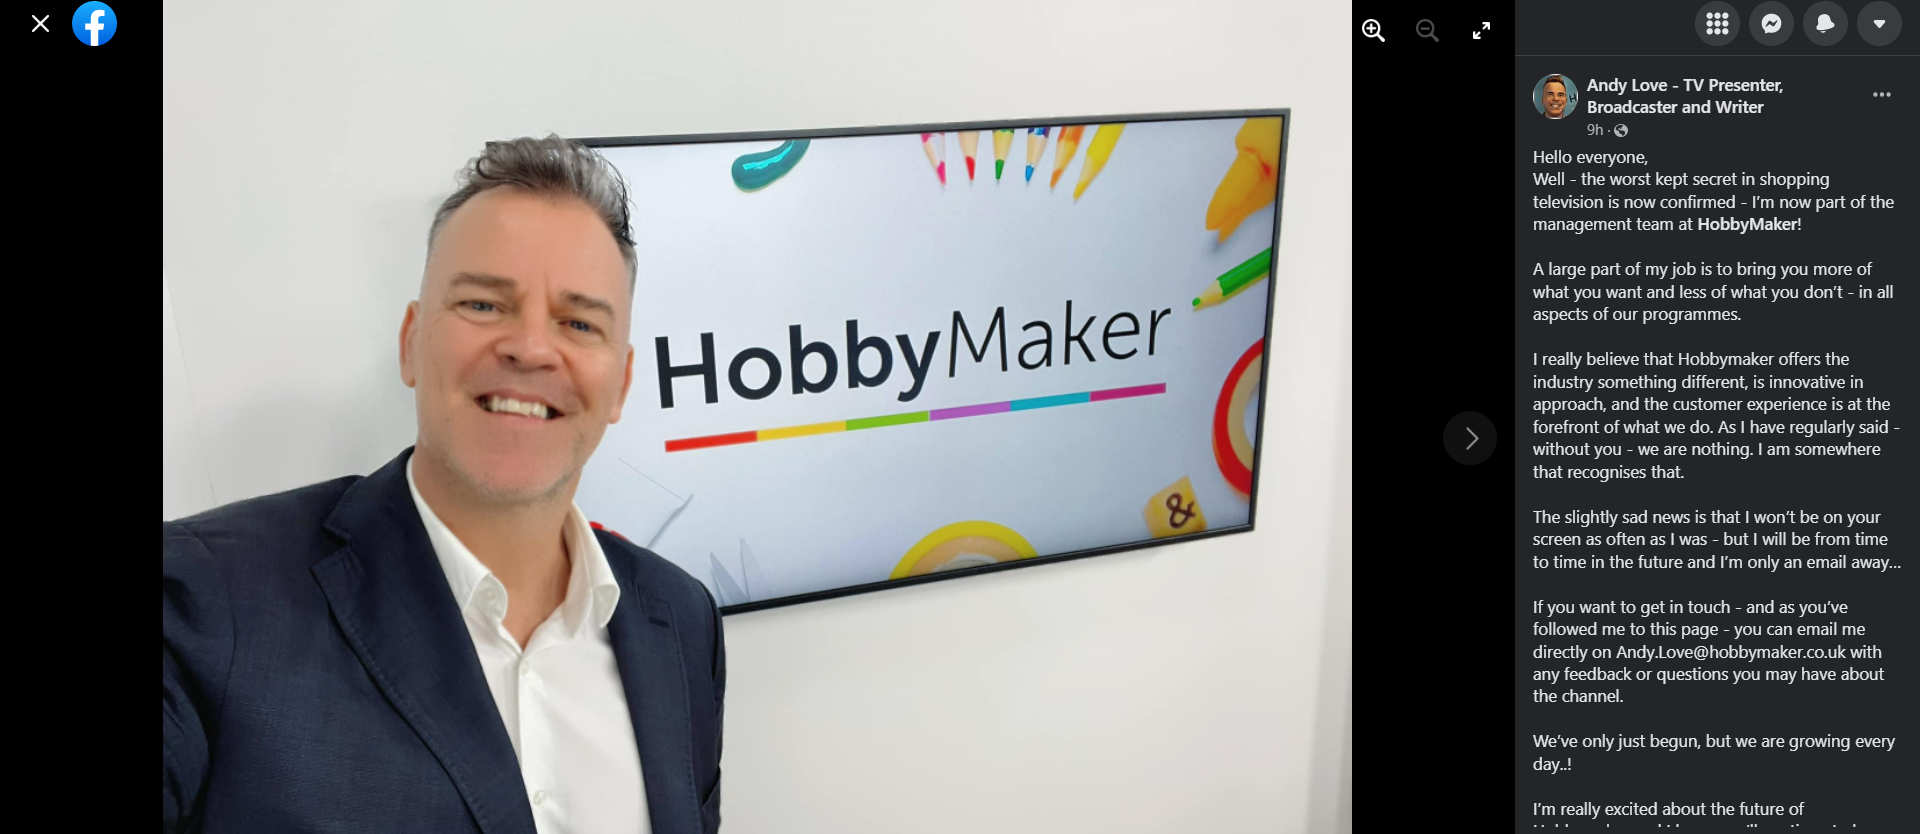 Andy-love-joins-the-management-team-at-hobbymaker-tv